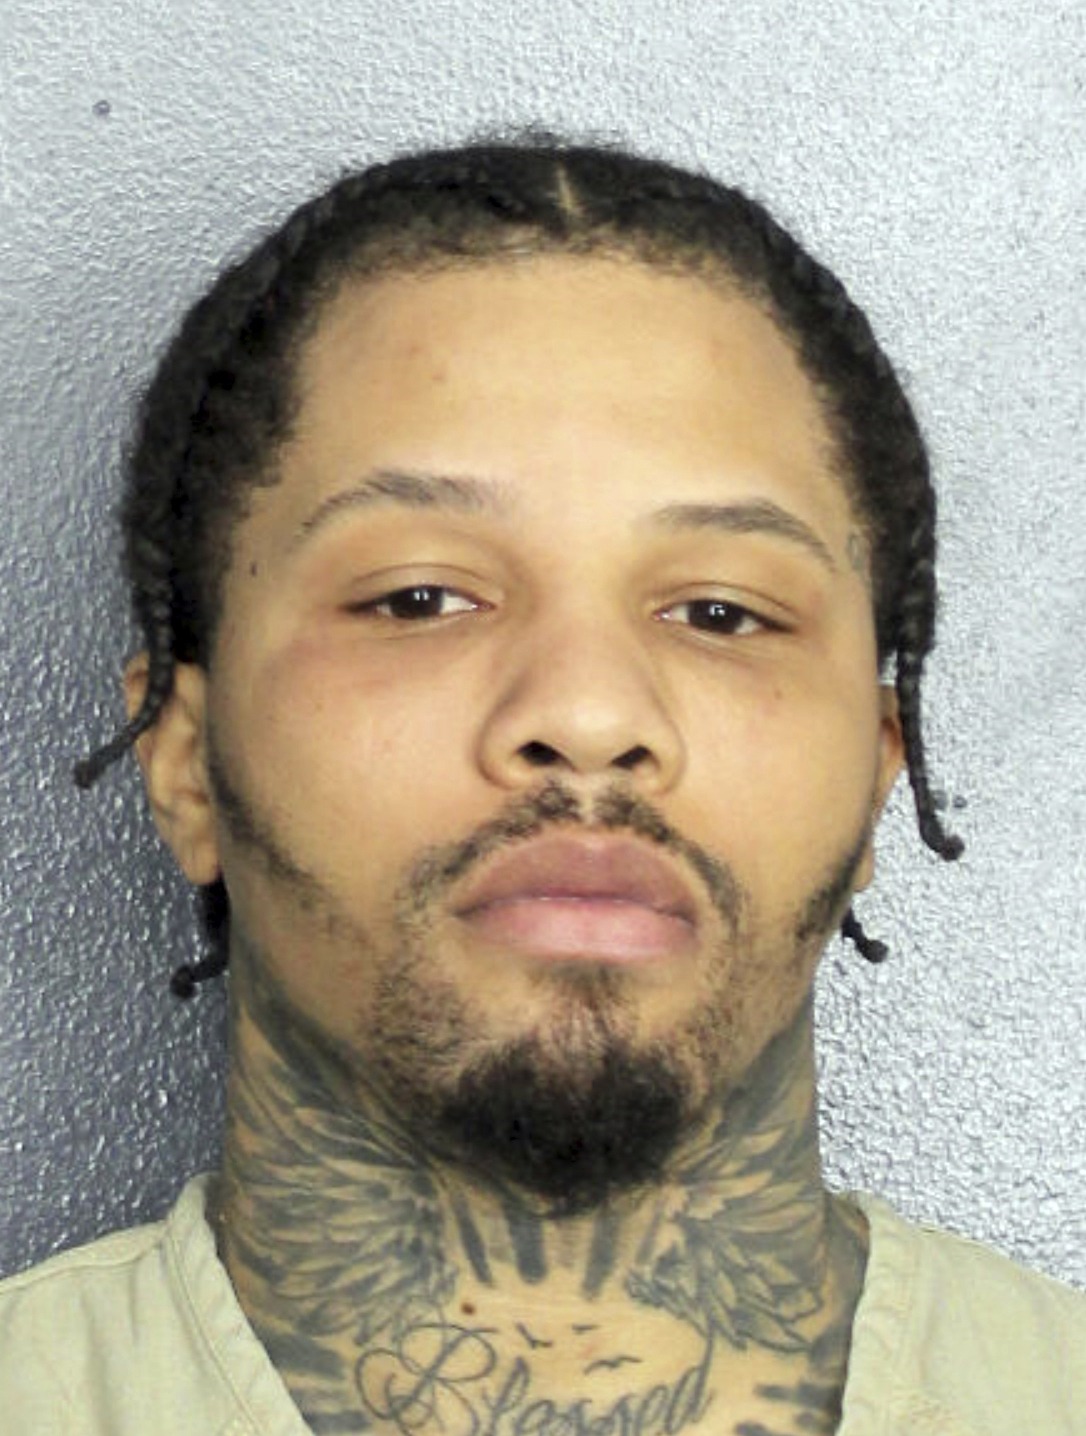 , Gervonta Davis ‘in JAIL after boxer violated his house arrest’ following guilty plea over hit-and-run